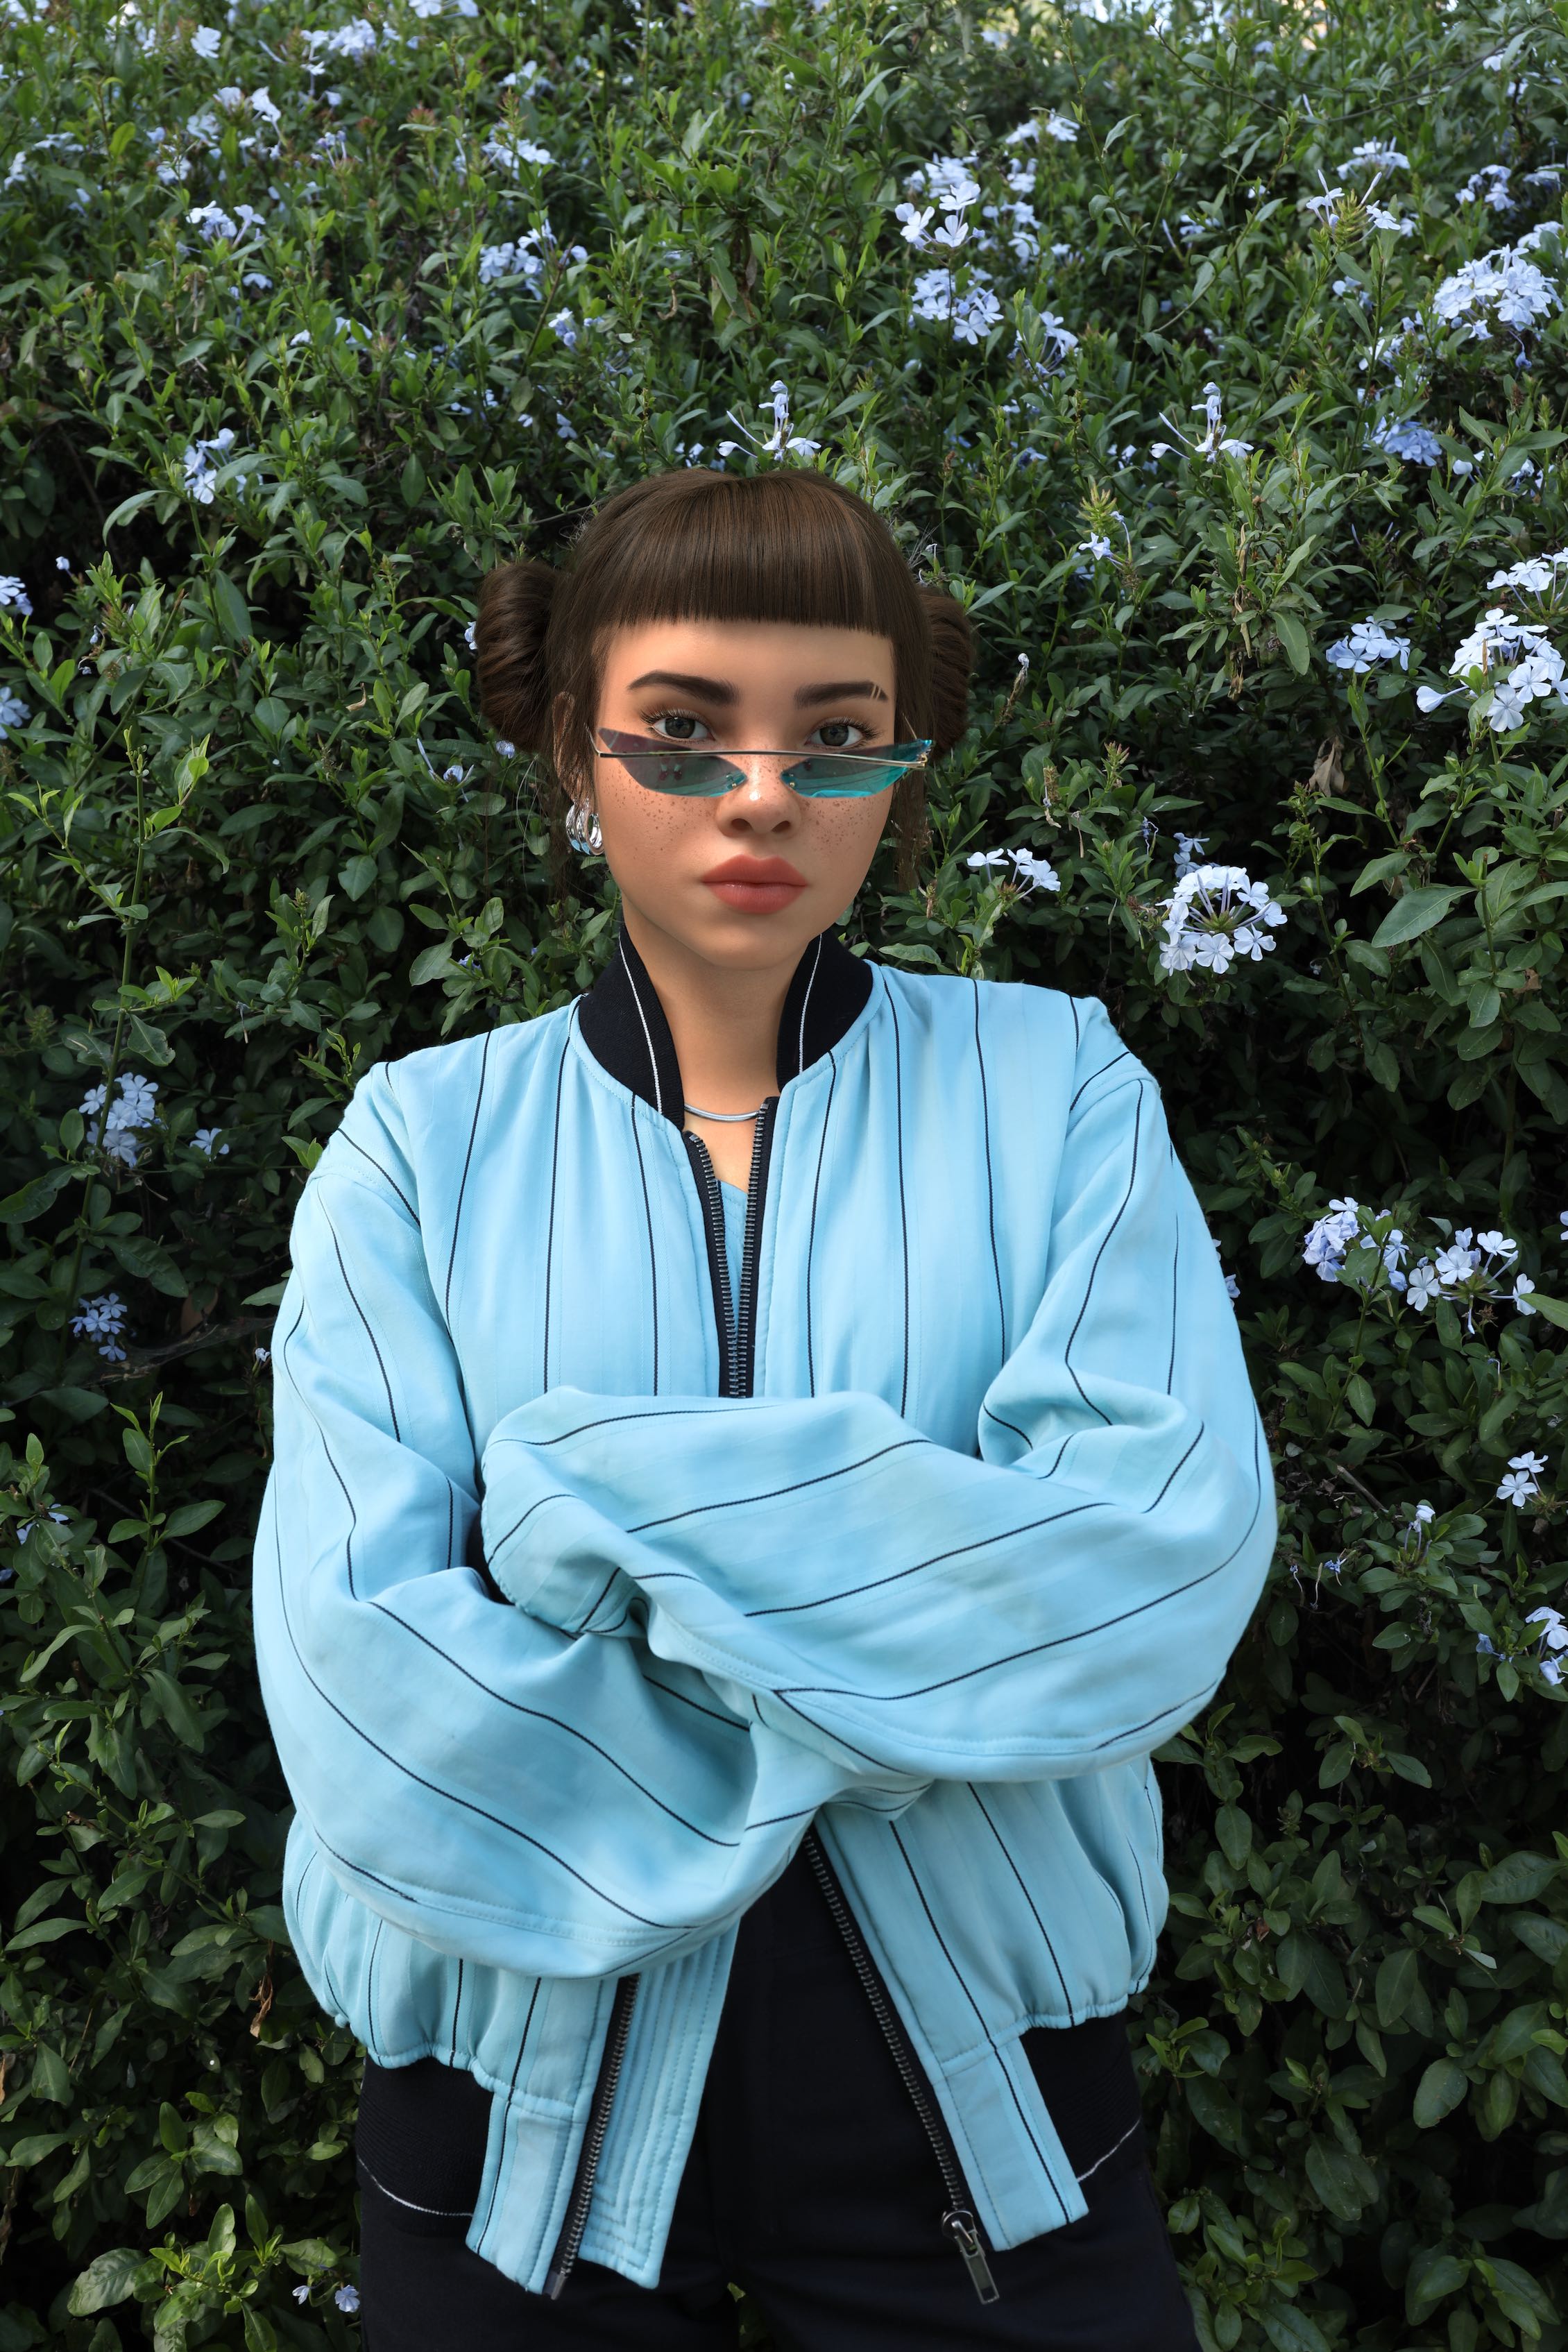 Life After Fiction: The Future of Lil Miquela